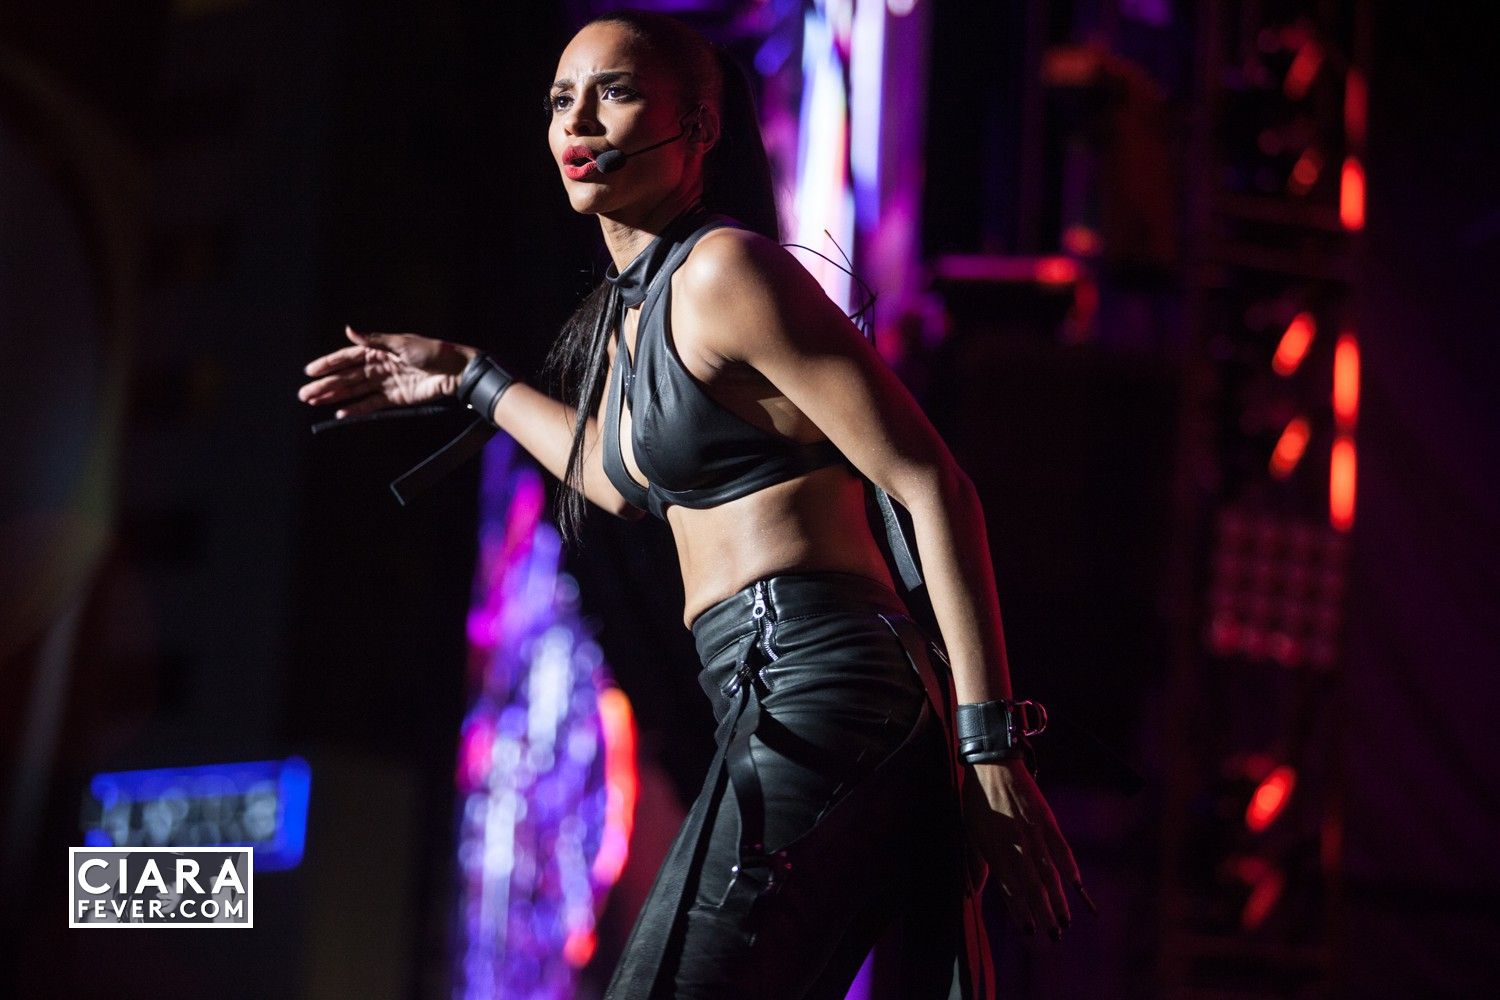 Ciara performs at the AT&T Playoff Playlist